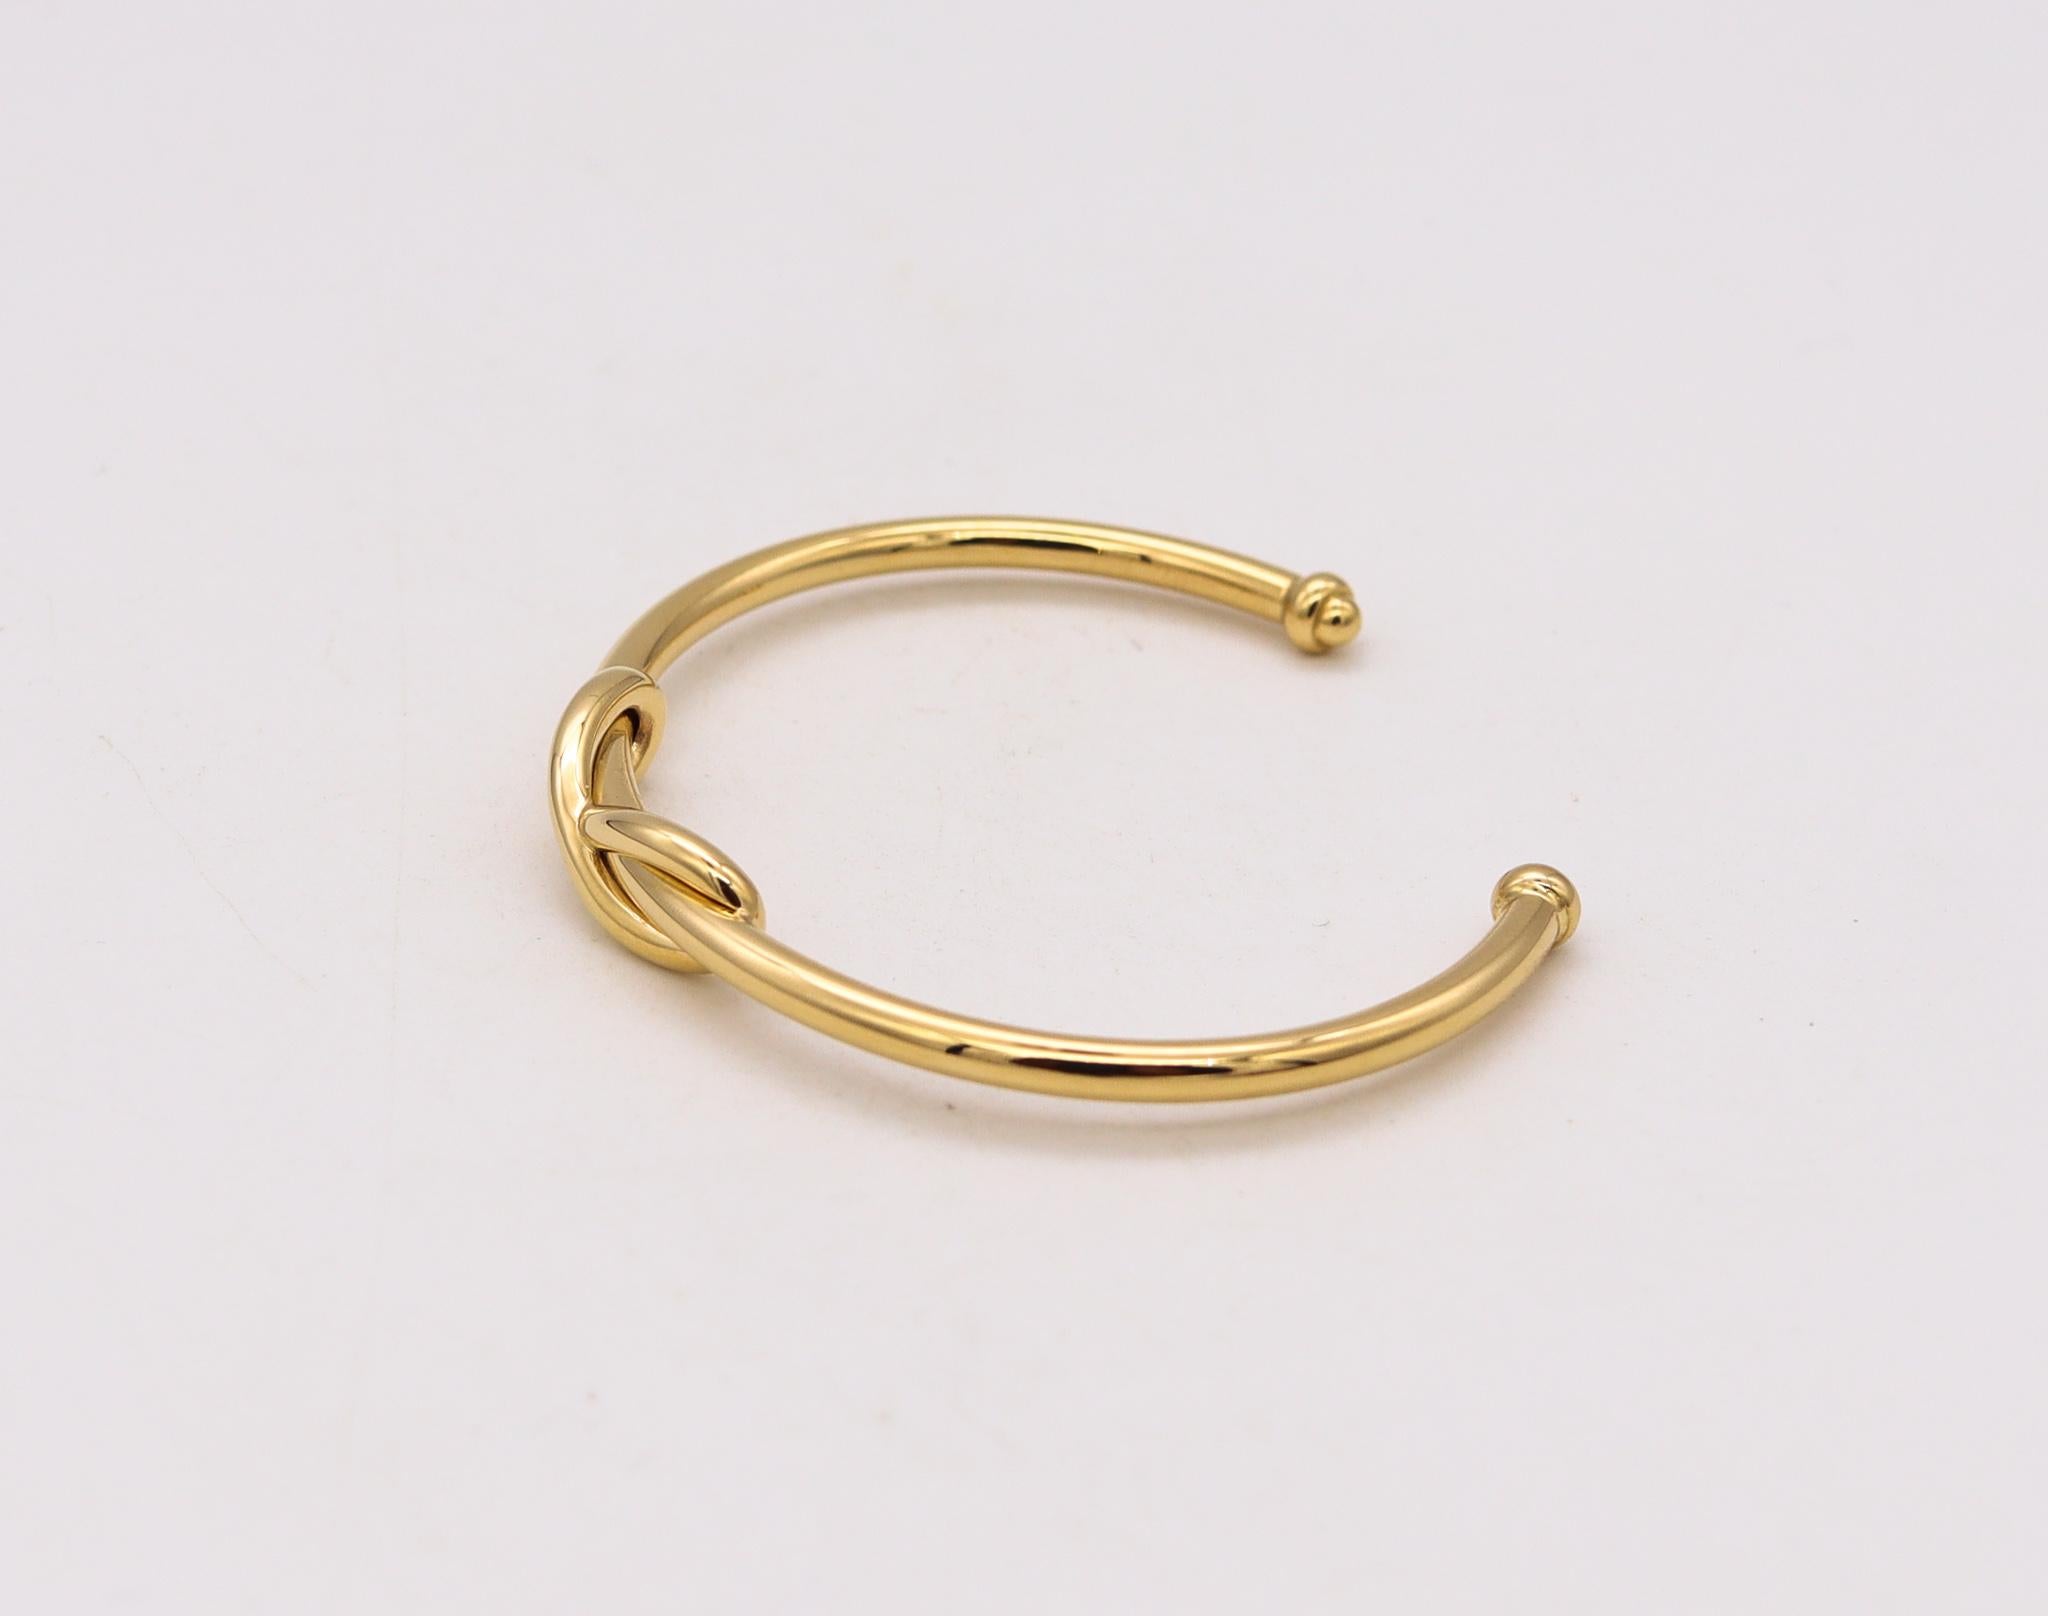 Tiffany Co Infinity Motif Cuff Bracelet In Solid 18Kt Yellow Gold With Boxes In Excellent Condition For Sale In Miami, FL